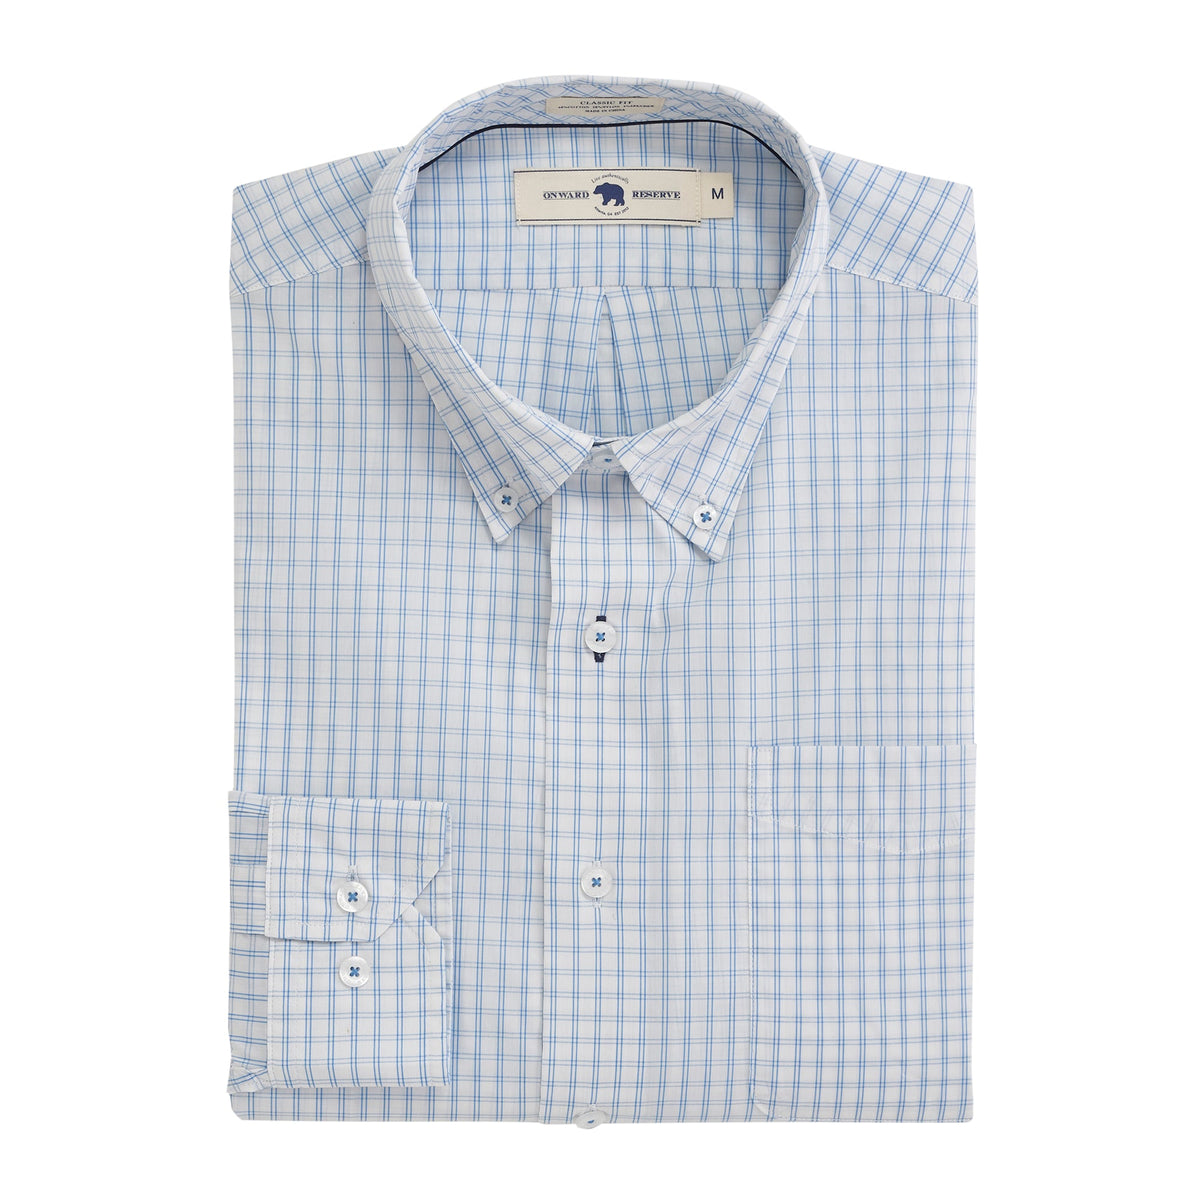 Onward Reserve Bell Classic Fit Button Down - Lichen Blue